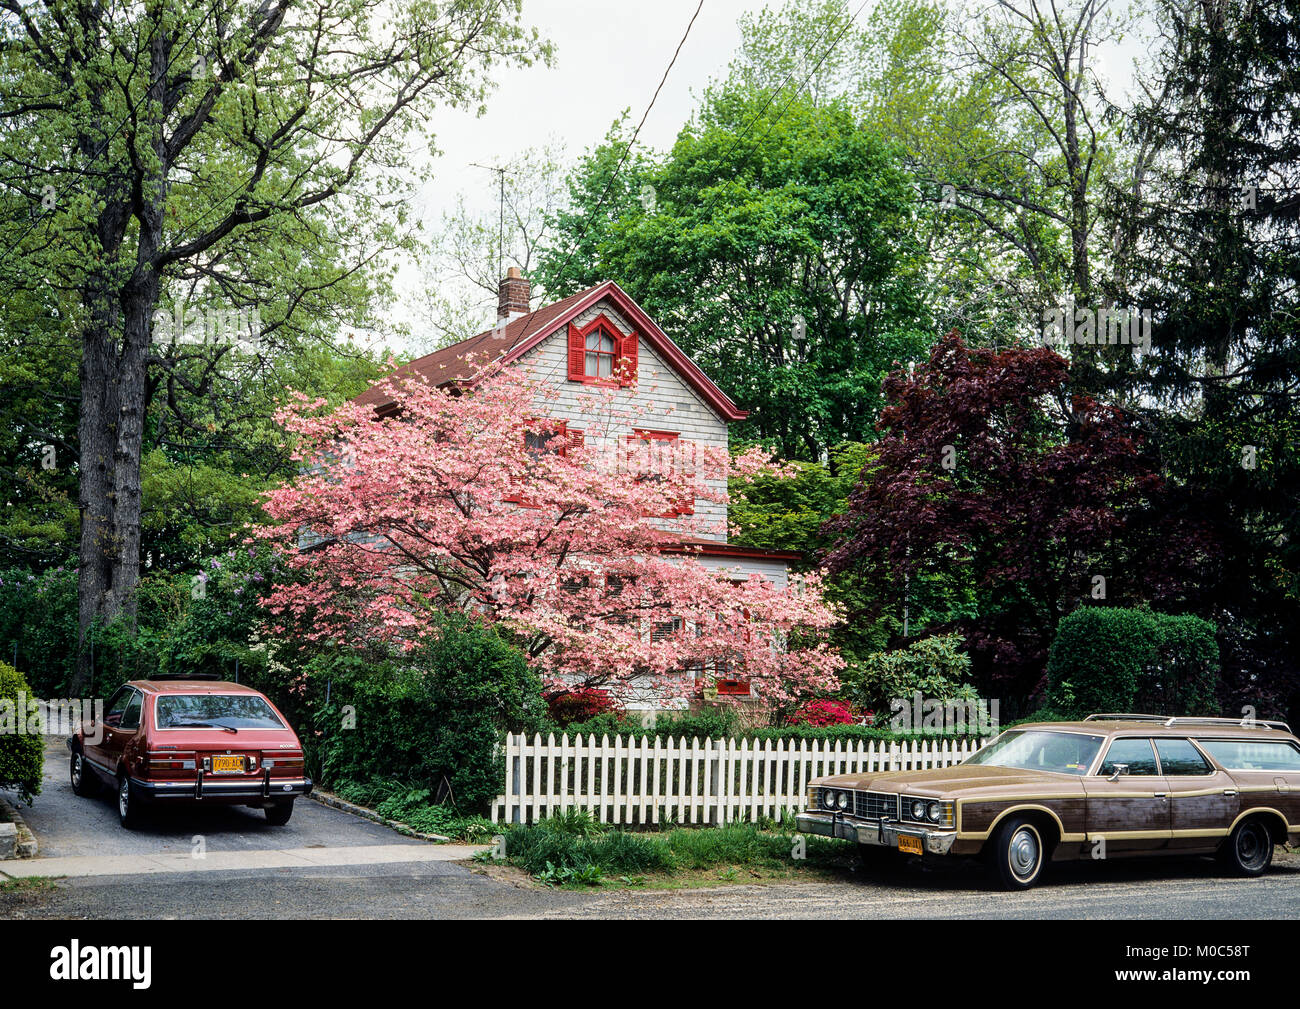 May 1982, white wooden detached house, blooming pink dogwood tree, parked cars, spring, Long Island, New york, NY, USA, Stock Photo